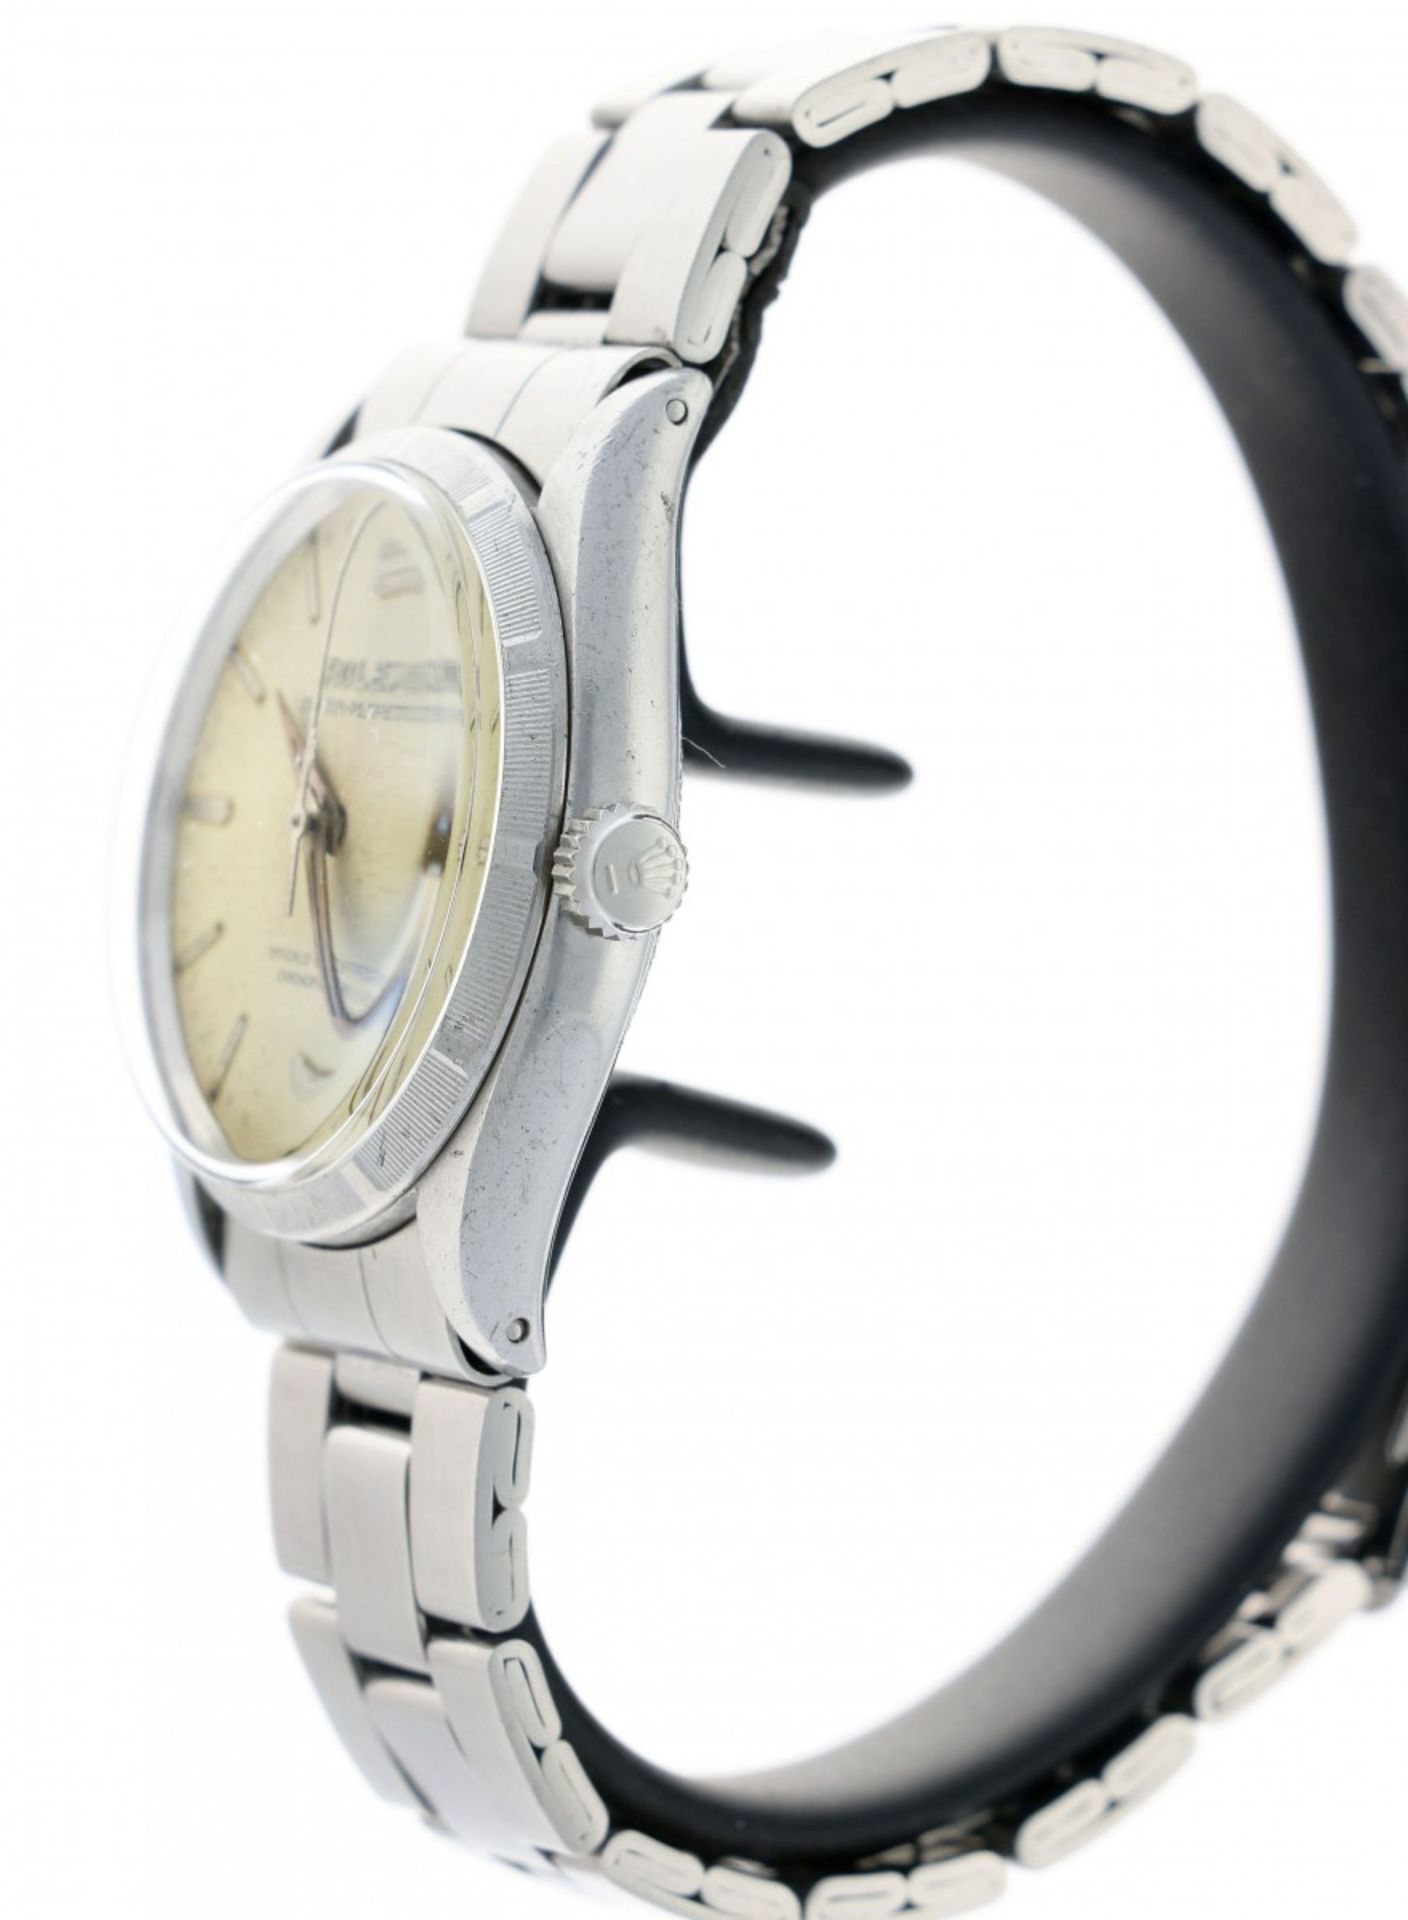 Rolex Oyster Perpetual 6565 - Men's watch - ca. 1958 - Image 5 of 7